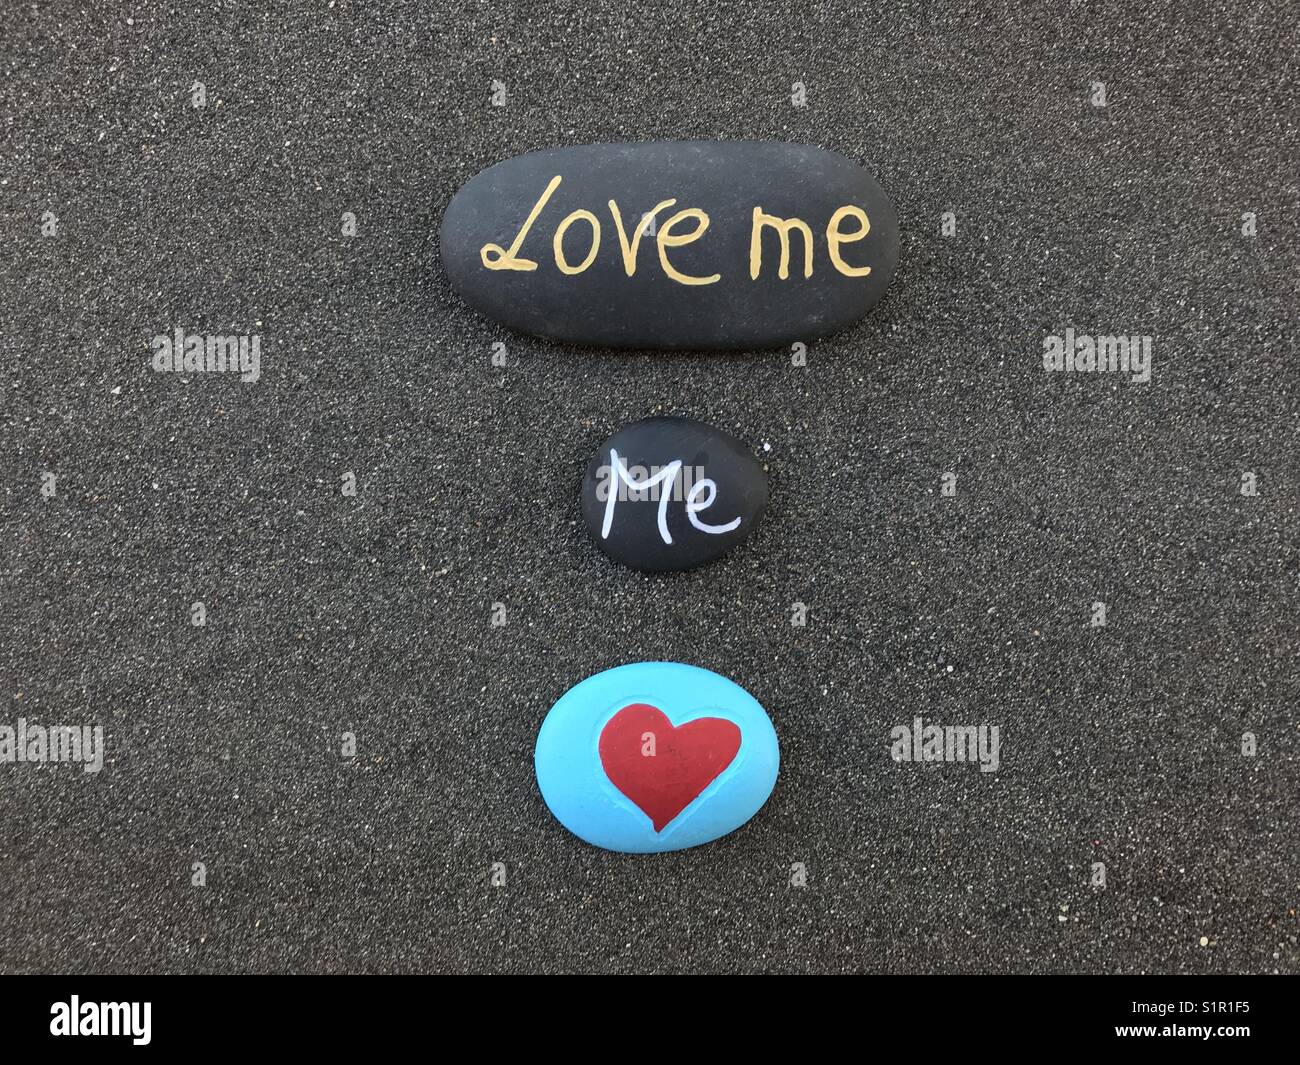 Love me message carved on stones over black volcanic sand Stock Photo